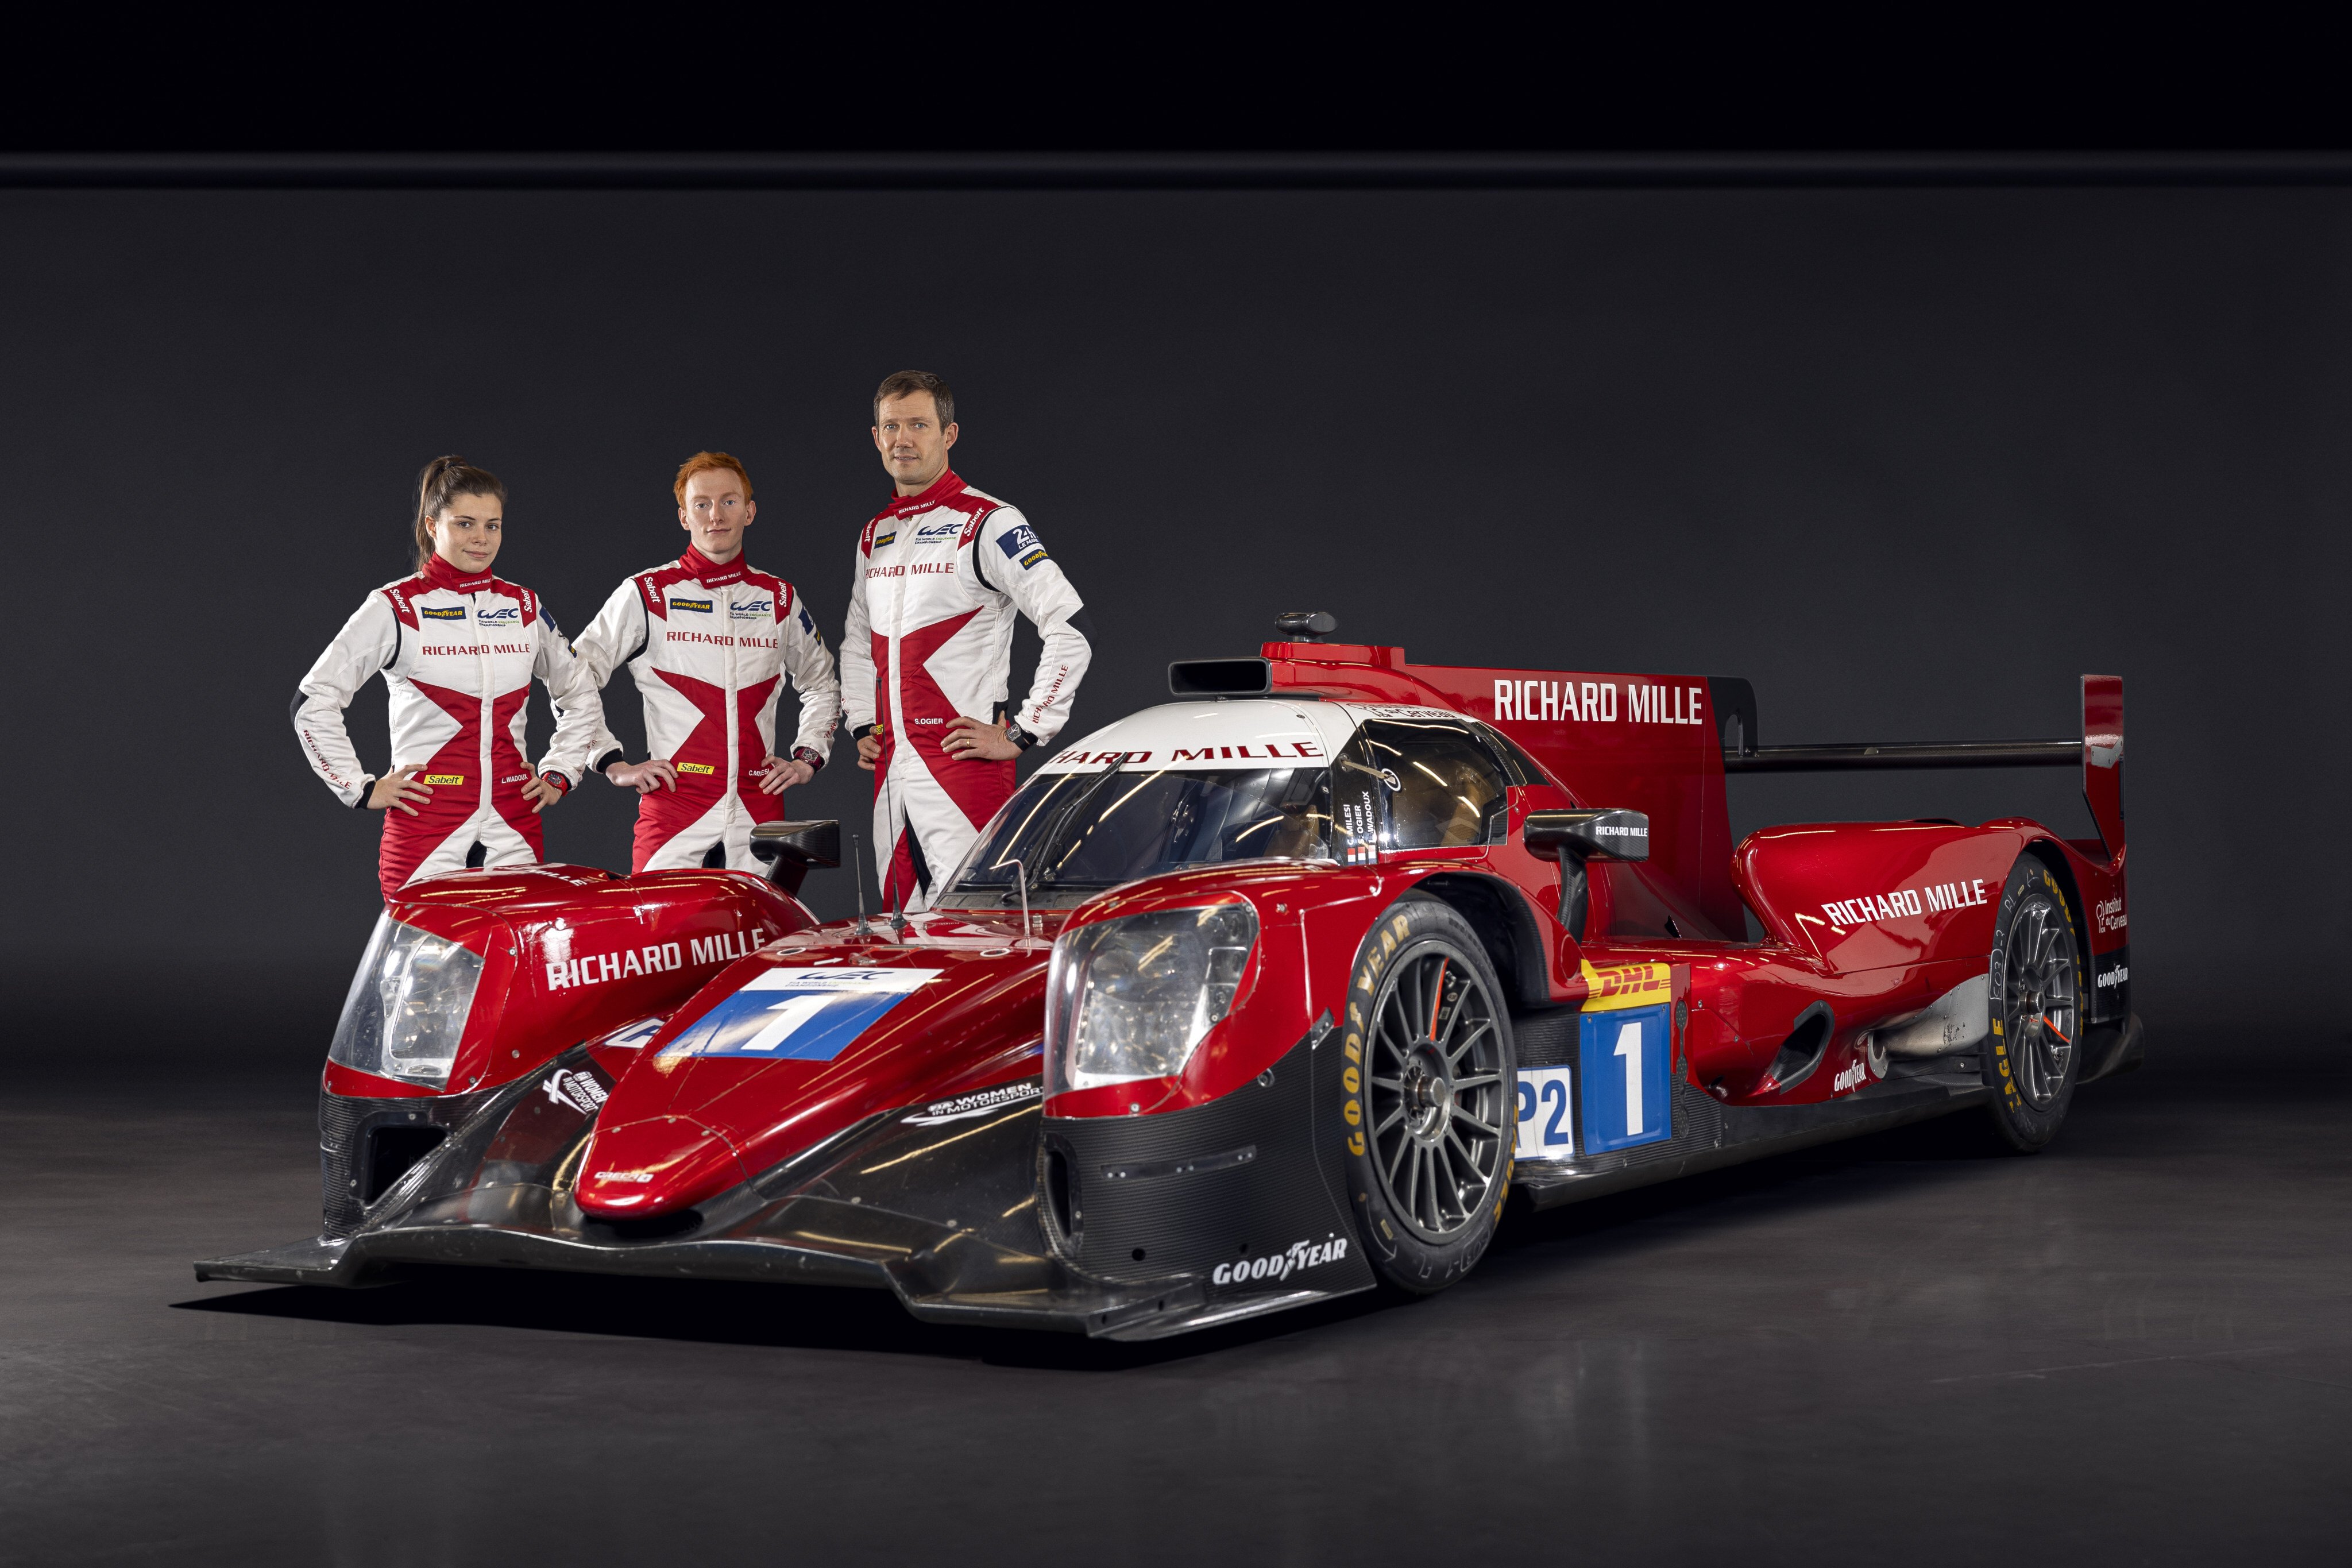 The new Richard Mille Racing Team will make history as the first mixed-gender team to compete in the FIA World Endurance Championship. Photo: Richard Mille